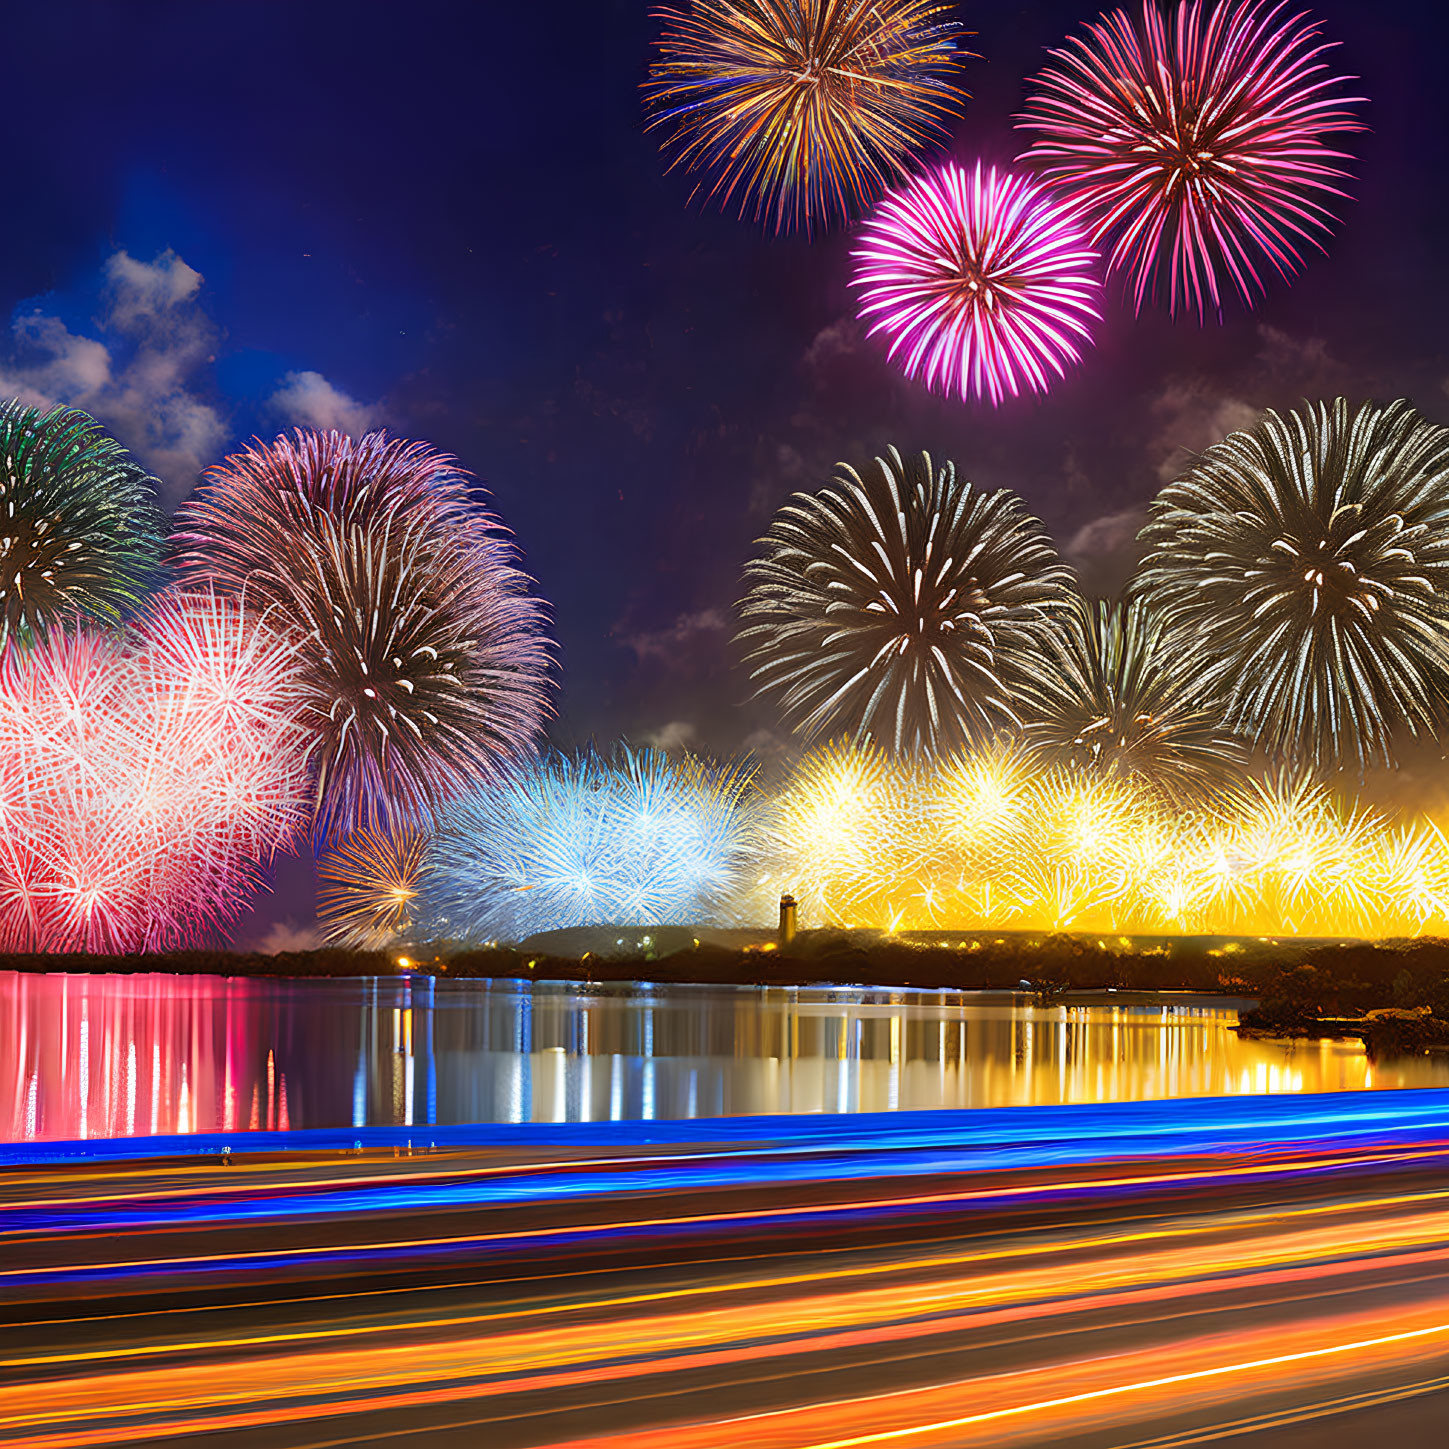 Colorful Fireworks Display Reflected in Water